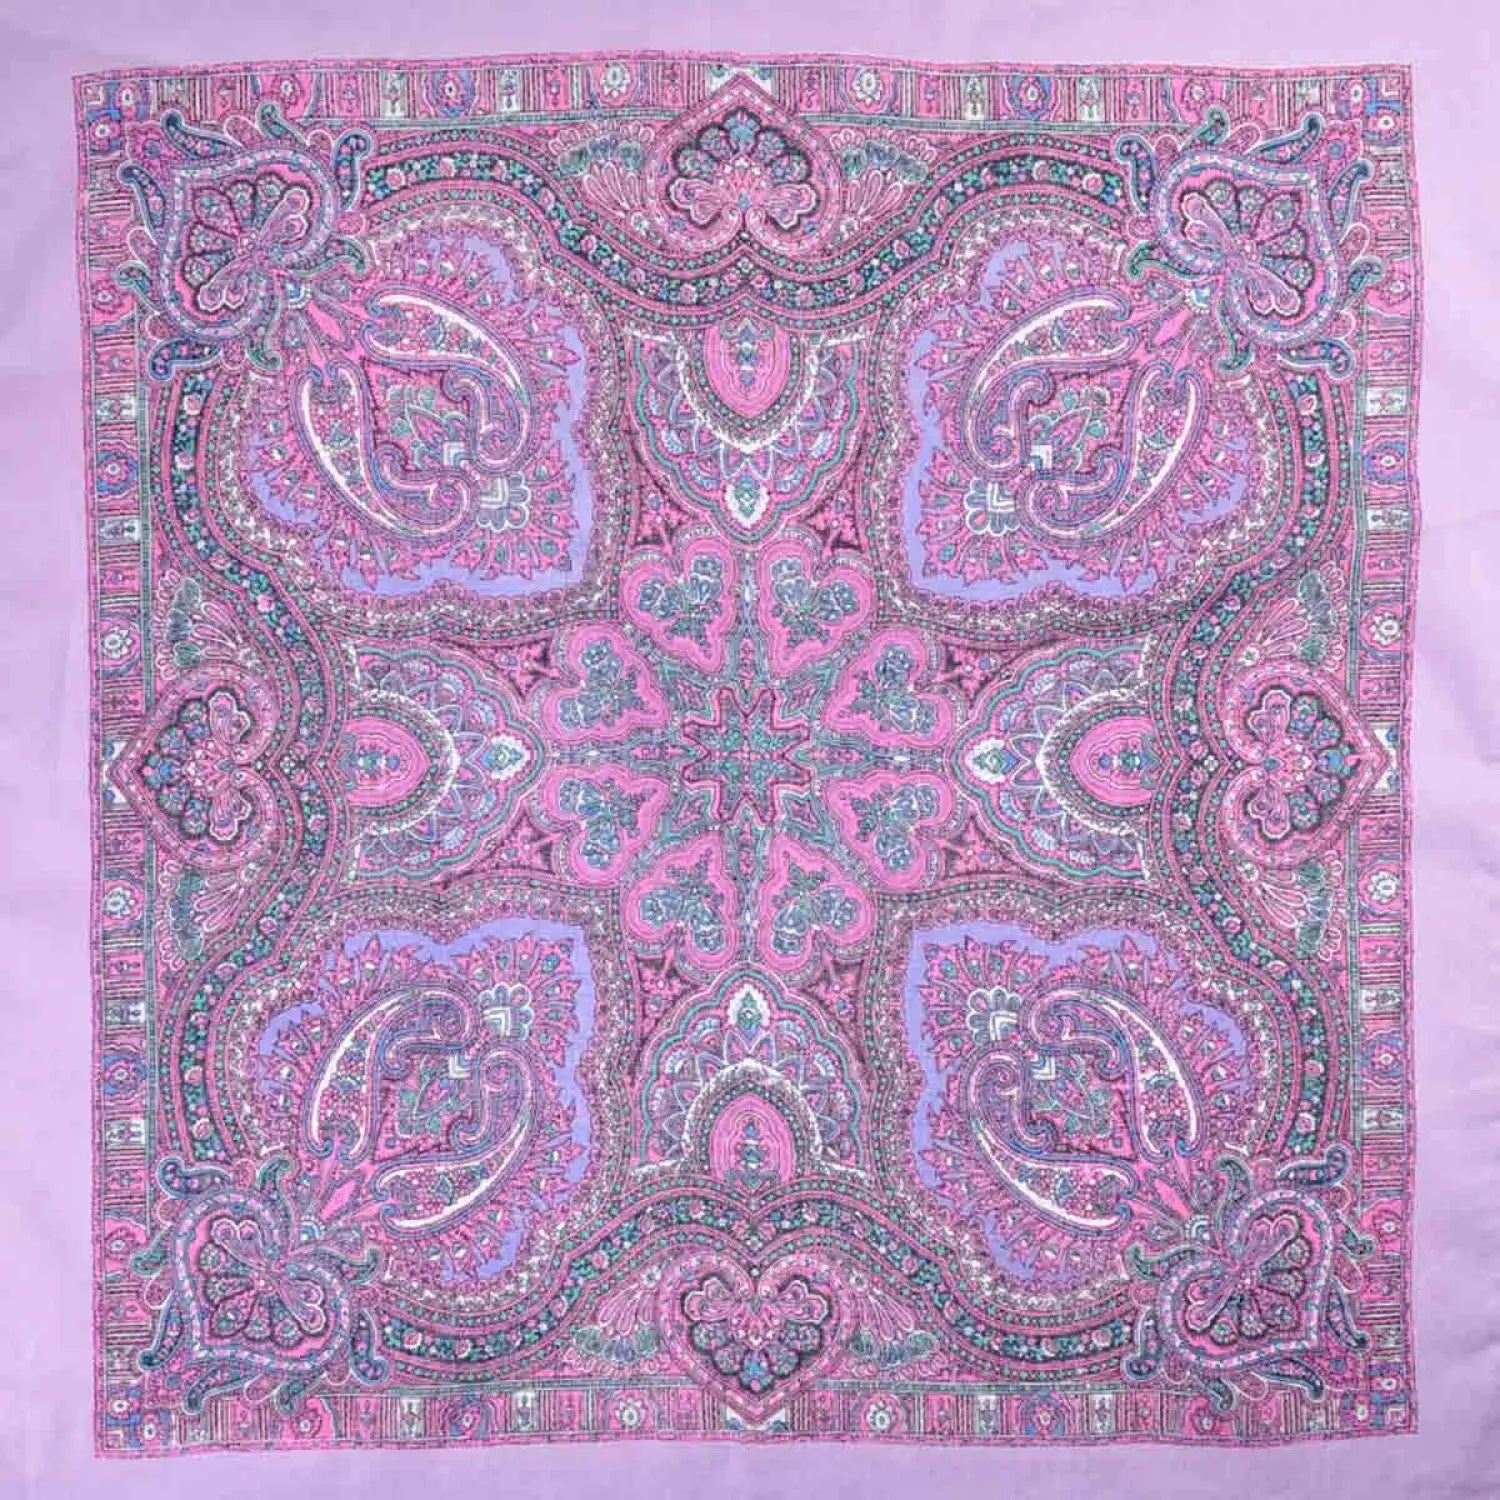 Classic Paisley Bandana made of 100% cotton with pink and blue paisley print scarf